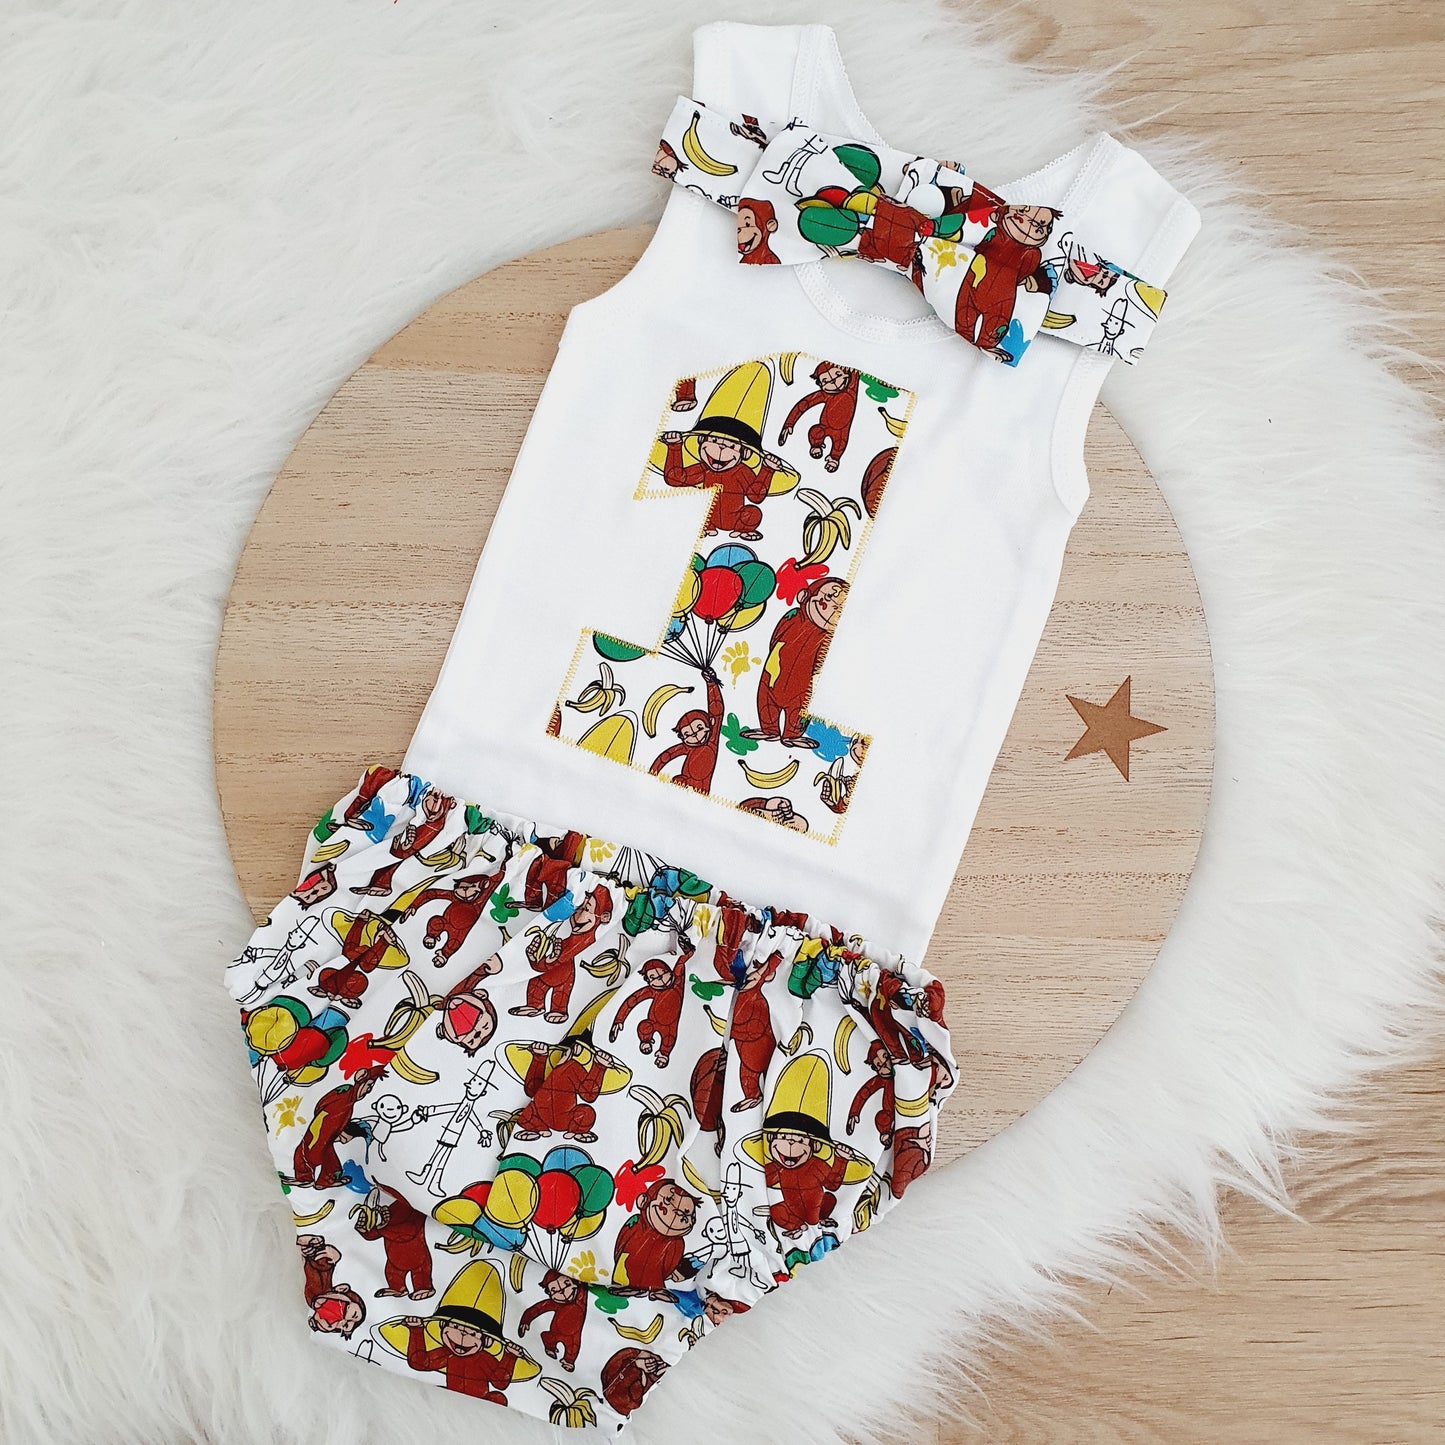 Curious George print Boys 1st Birthday - Cake Smash Outfit - Size 0, Nappy Cover, Tie & Singlet Set, CURIOUS MONKEY print